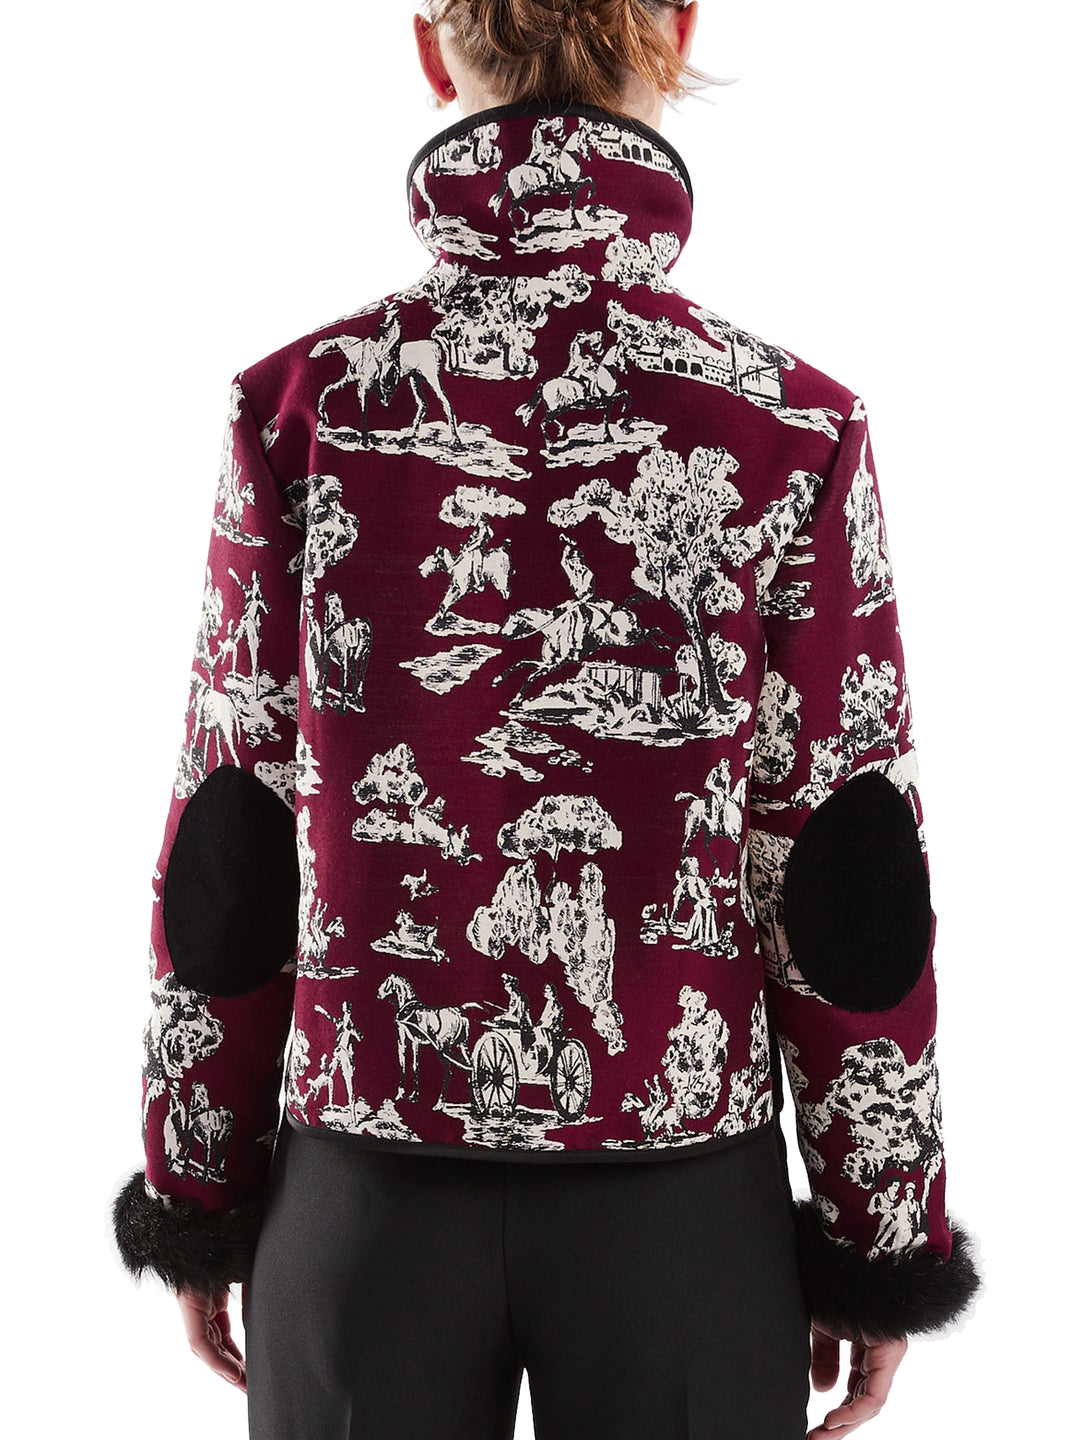 Women’s jacket with elbow pads maroon toile and faux fur cuffs